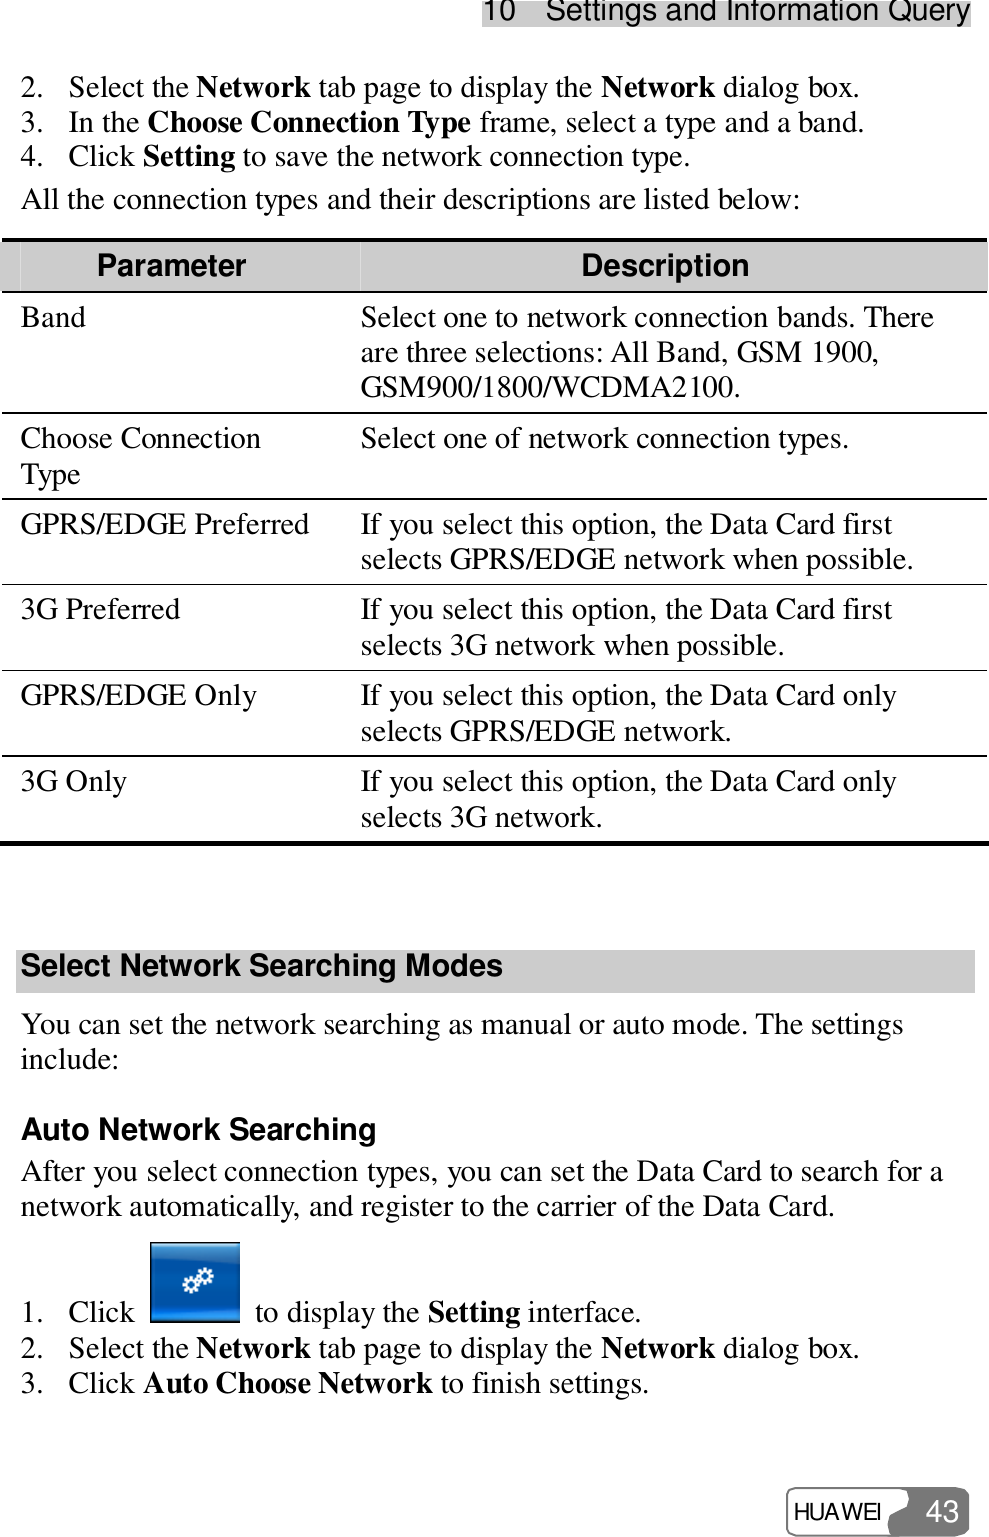 10  Settings and Information Query HUAWEI  43 2. Select the Network tab page to display the Network dialog box. 3. In the Choose Connection Type frame, select a type and a band. 4. Click Setting to save the network connection type. All the connection types and their descriptions are listed below: Parameter  Description Band  Select one to network connection bands. There are three selections: All Band, GSM 1900, GSM900/1800/WCDMA2100. Choose Connection Type  Select one of network connection types. GPRS/EDGE Preferred If you select this option, the Data Card first selects GPRS/EDGE network when possible. 3G Preferred  If you select this option, the Data Card first selects 3G network when possible. GPRS/EDGE Only  If you select this option, the Data Card only selects GPRS/EDGE network. 3G Only  If you select this option, the Data Card only selects 3G network.  Select Network Searching Modes You can set the network searching as manual or auto mode. The settings include: Auto Network Searching After you select connection types, you can set the Data Card to search for a network automatically, and register to the carrier of the Data Card. 1. Click   to display the Setting interface. 2. Select the Network tab page to display the Network dialog box. 3. Click Auto Choose Network to finish settings. 